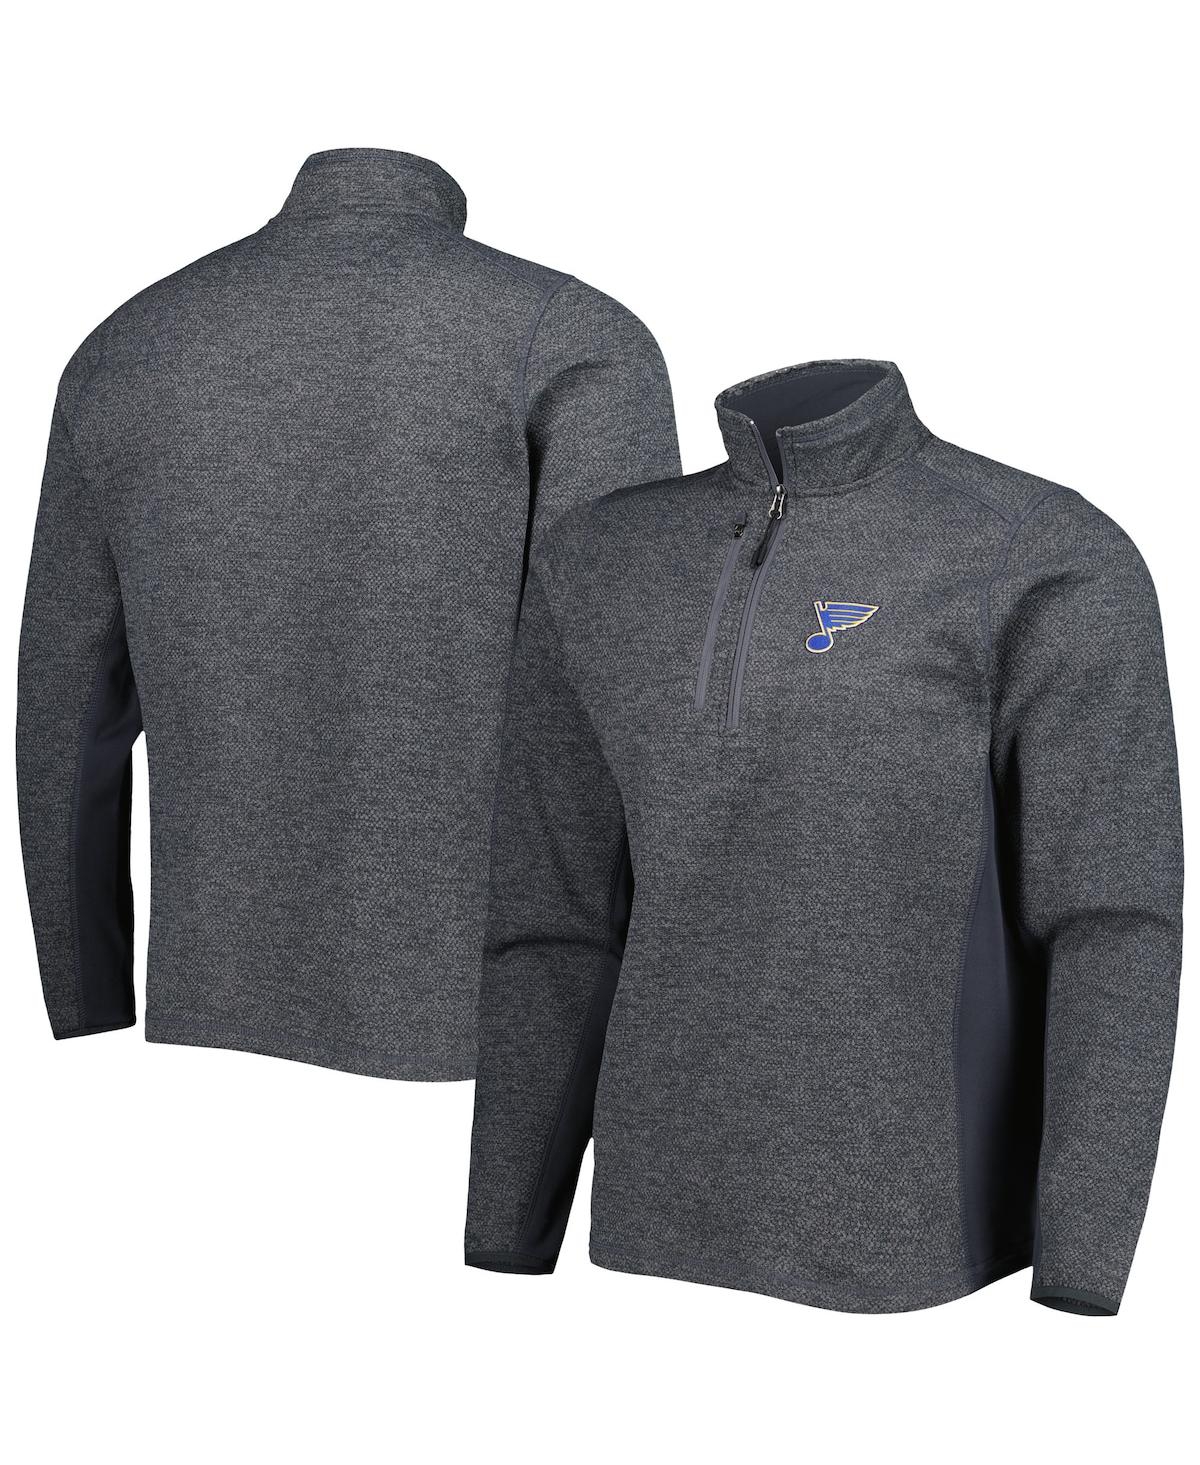 Men's Antigua Heathered Charcoal St. Louis Blues Course Quarter-Zip Jacket - Heathered Charcoal